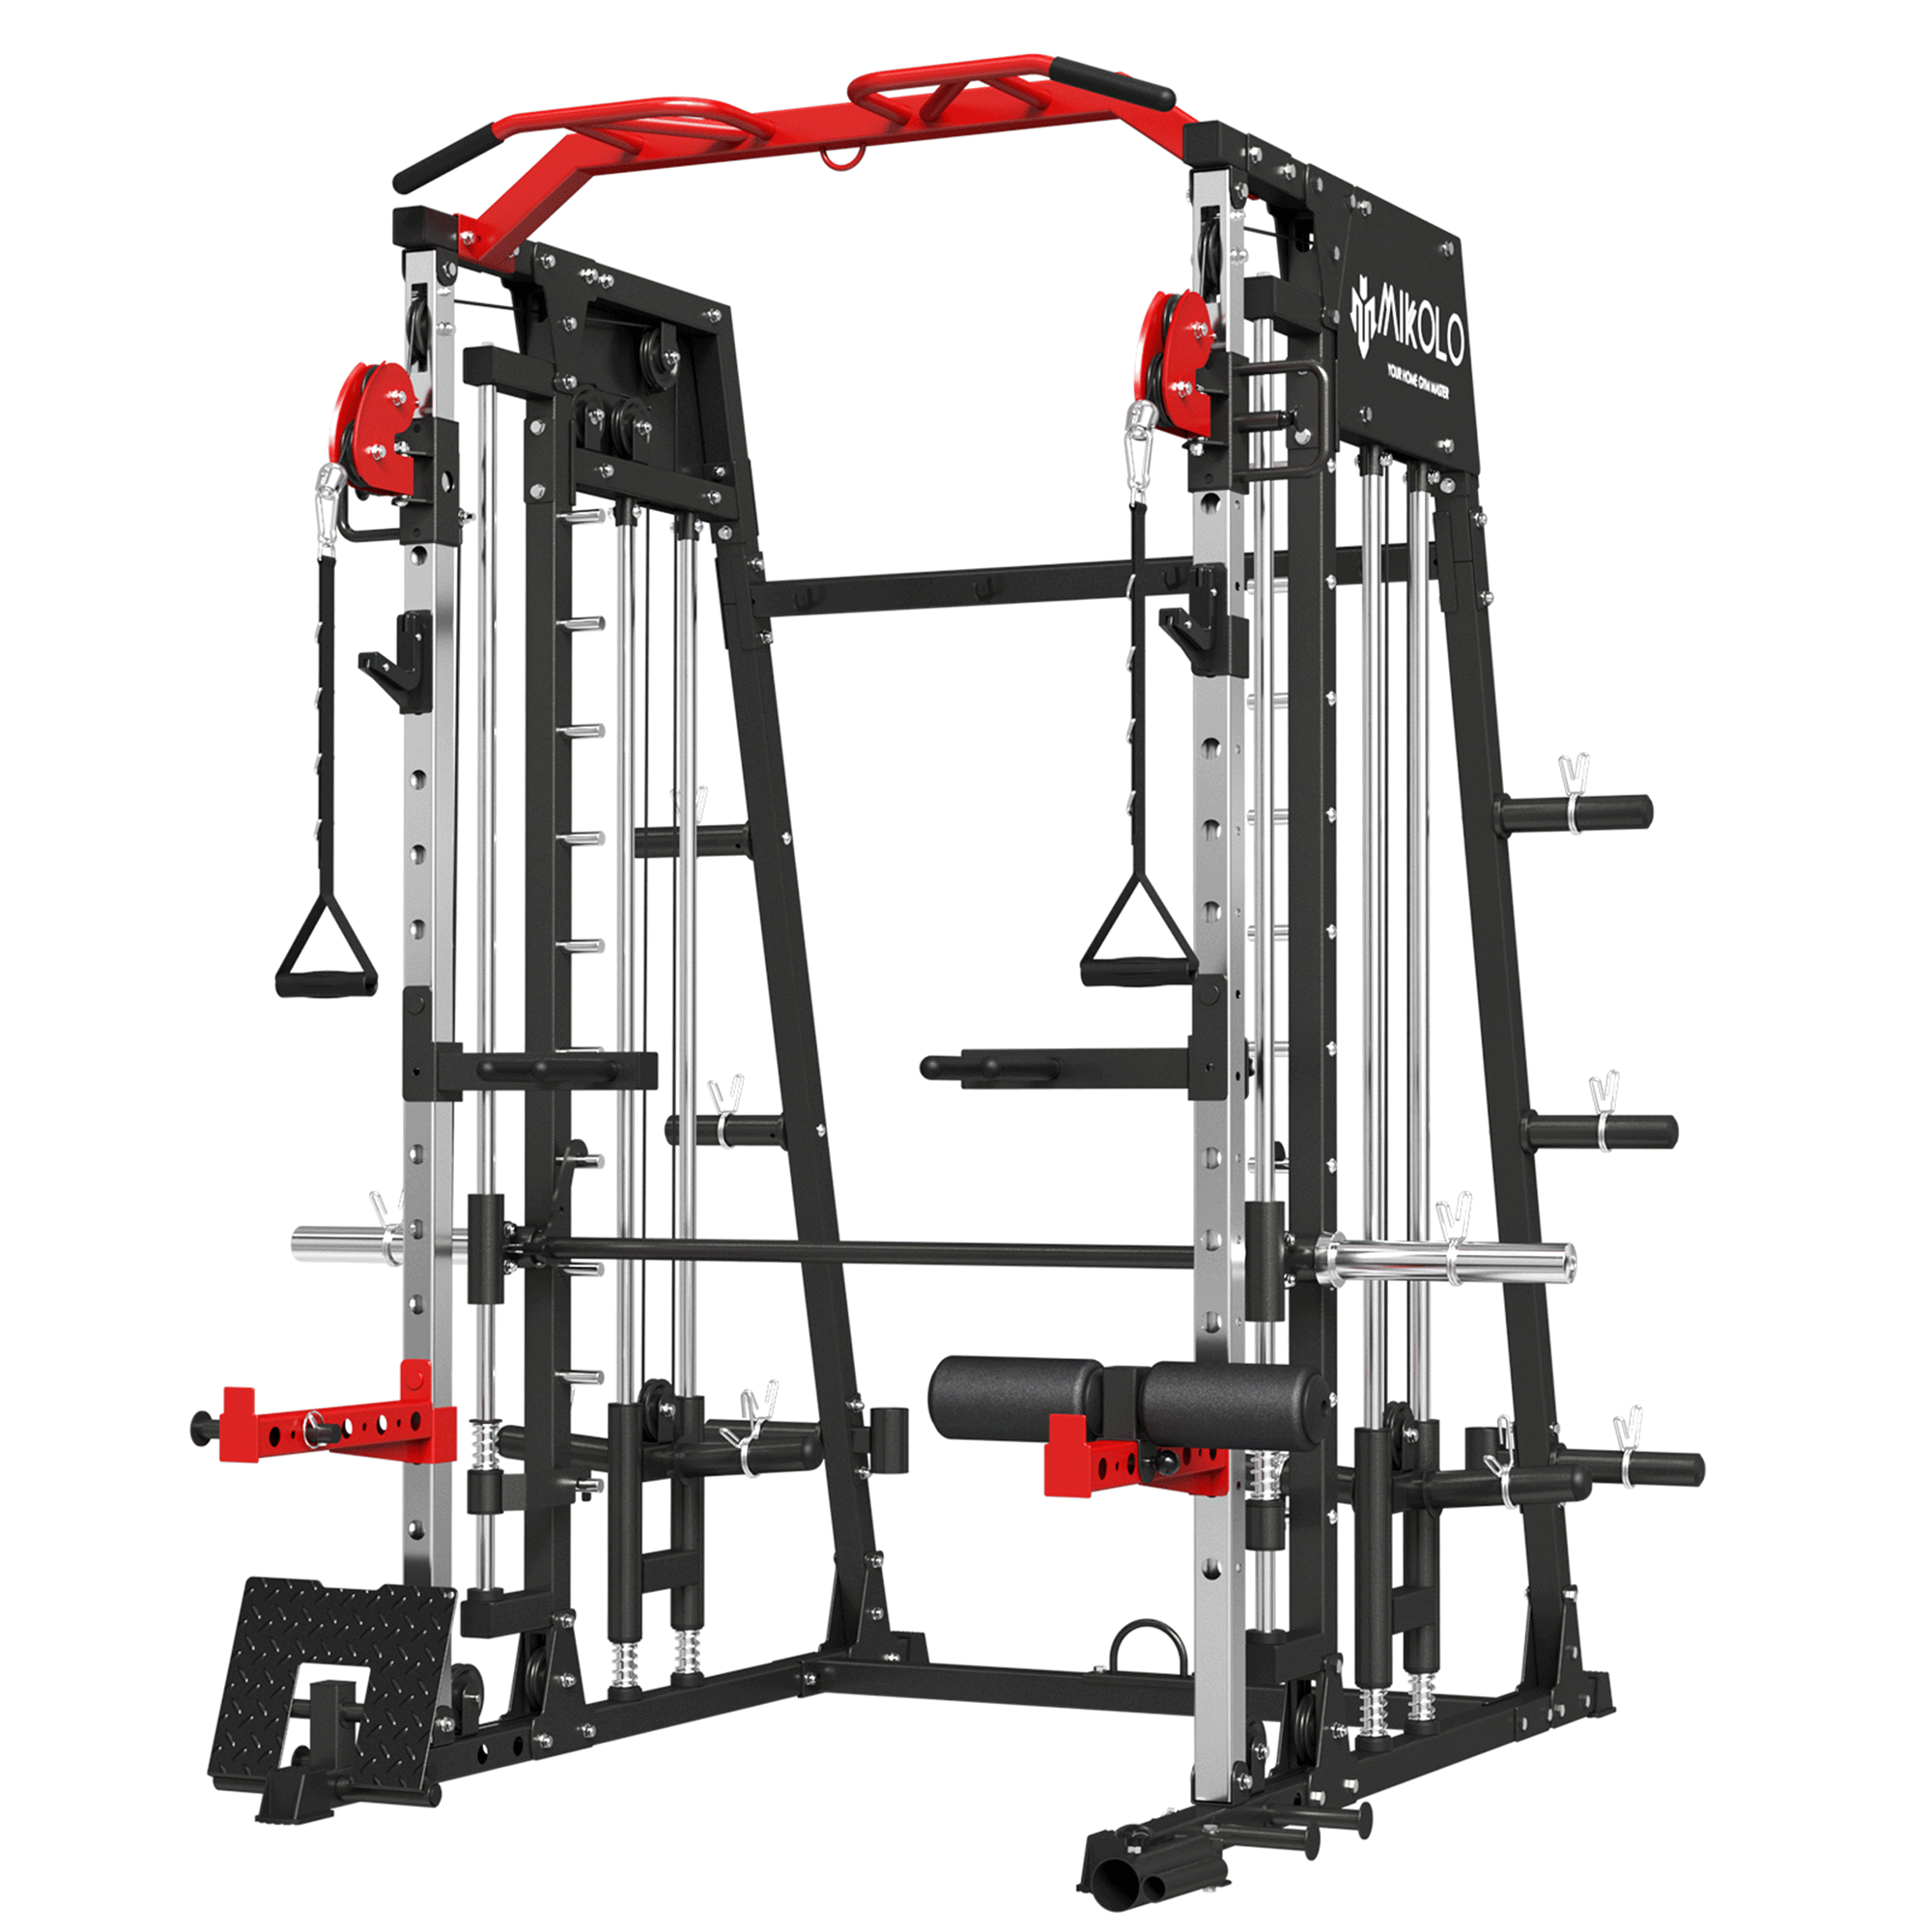  Mikolo Smith Machine, 2000LBS Multifunctional Squat Rack with  LAT Pull Down System&Cable Crossover Machine for Home Gym, Power Cage with  Dip/Leg Raise Attachments, Free Handles, Band Pegs（Black） : Sports &  Outdoors